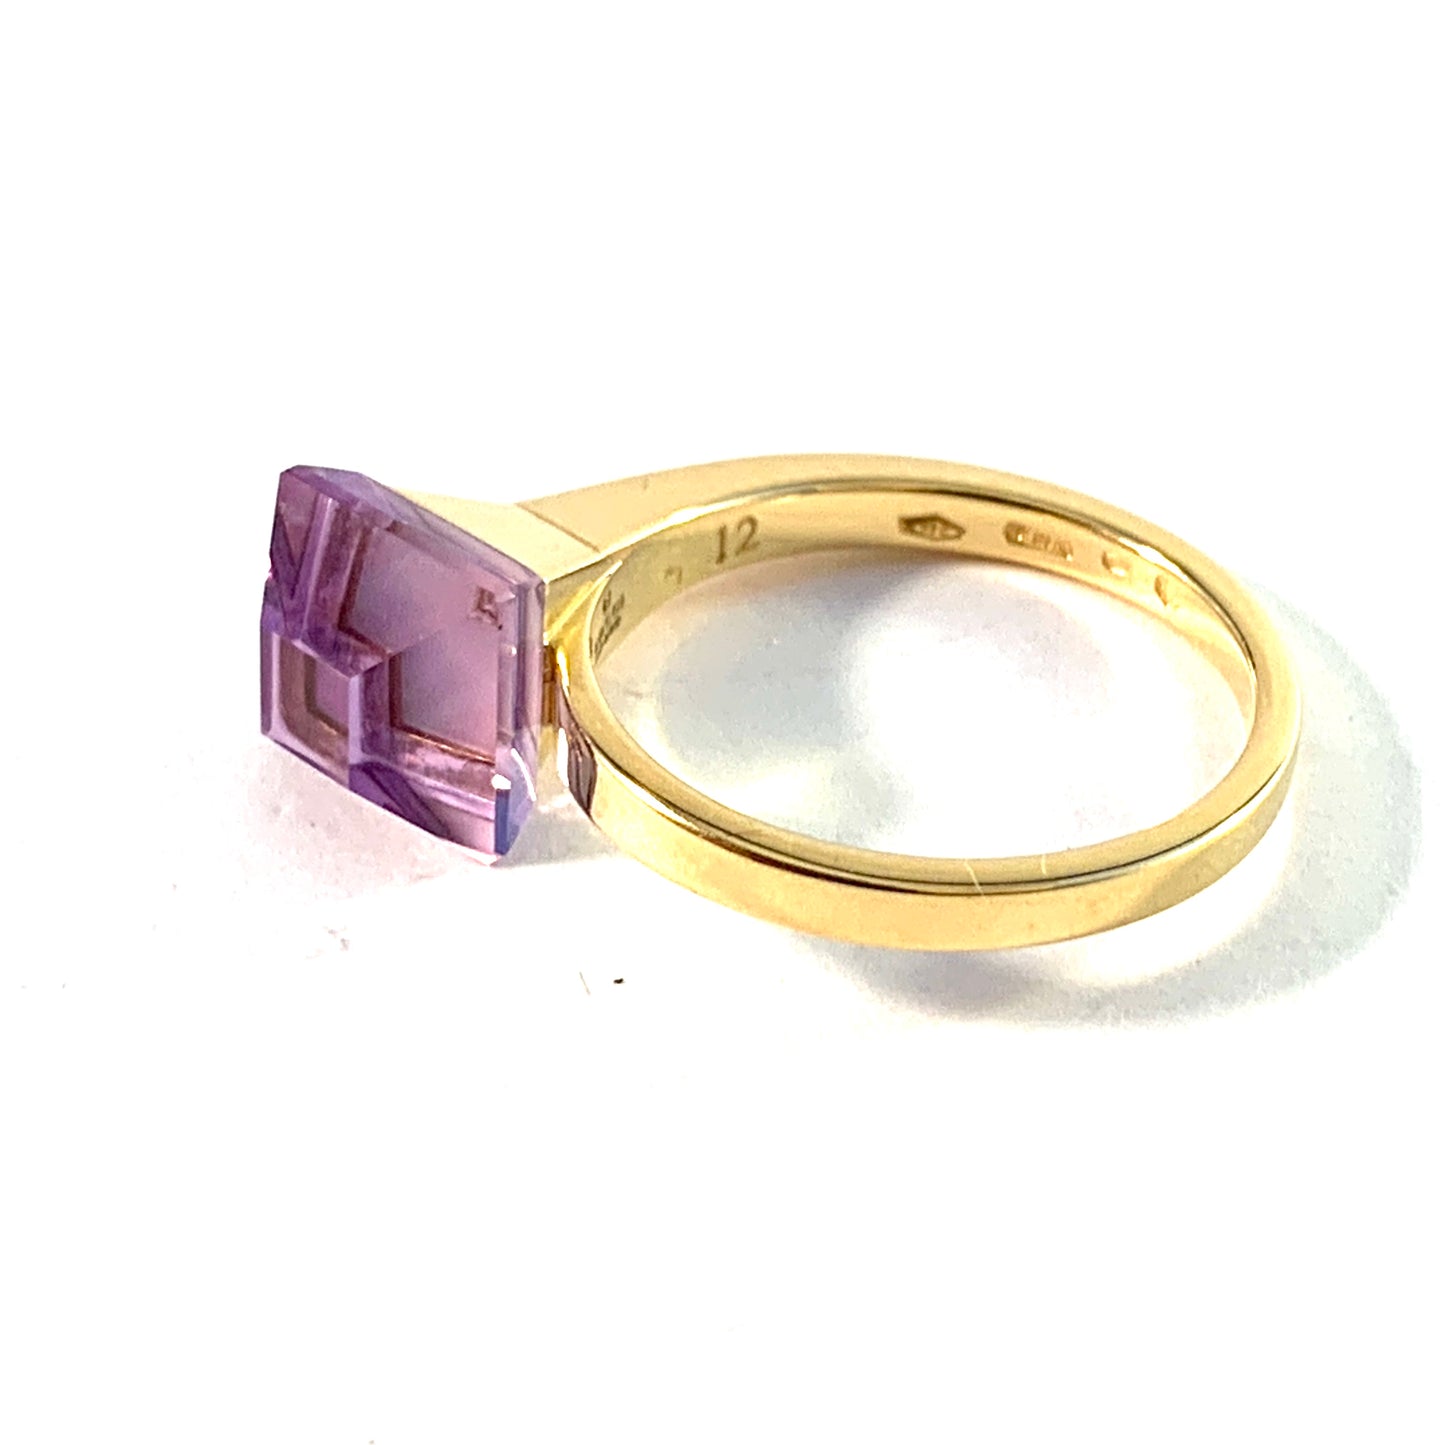 GUCCI, Design Chiodo. 18k Gold Amethyst Ring. Boxed.